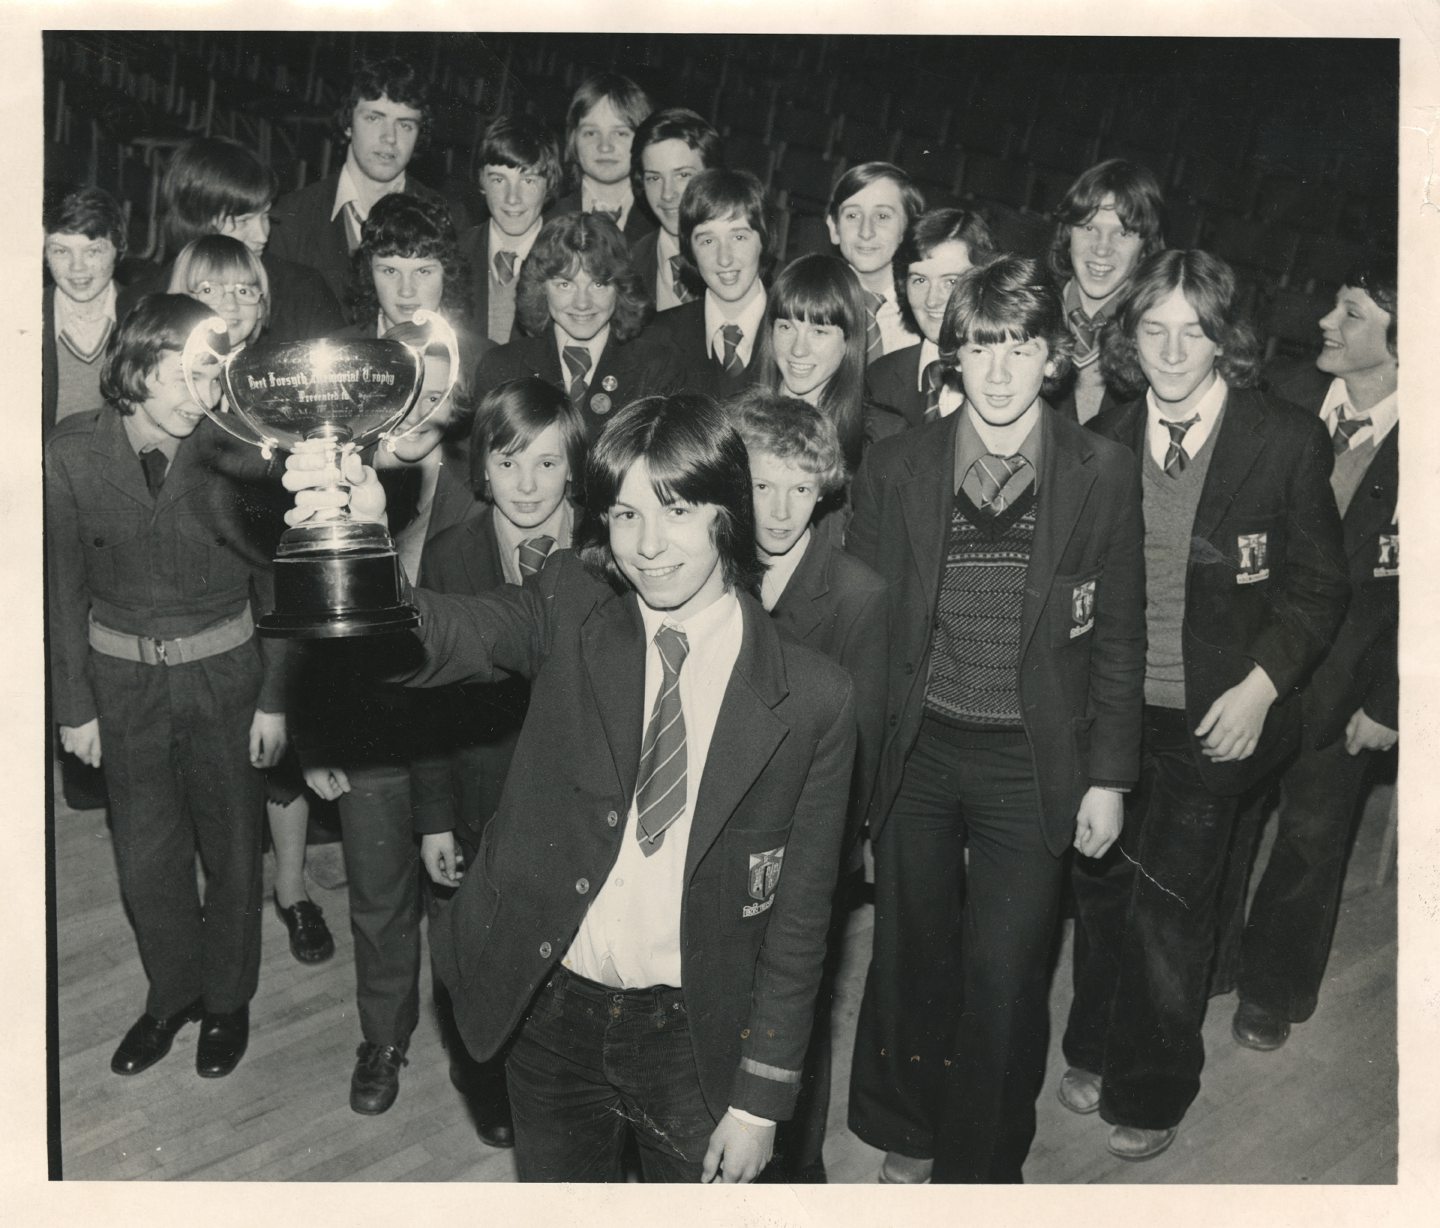 The table tennis toppers smile with their trophies after winning all three Aberdeen Schools Table Tennis Association leagues in 1978.